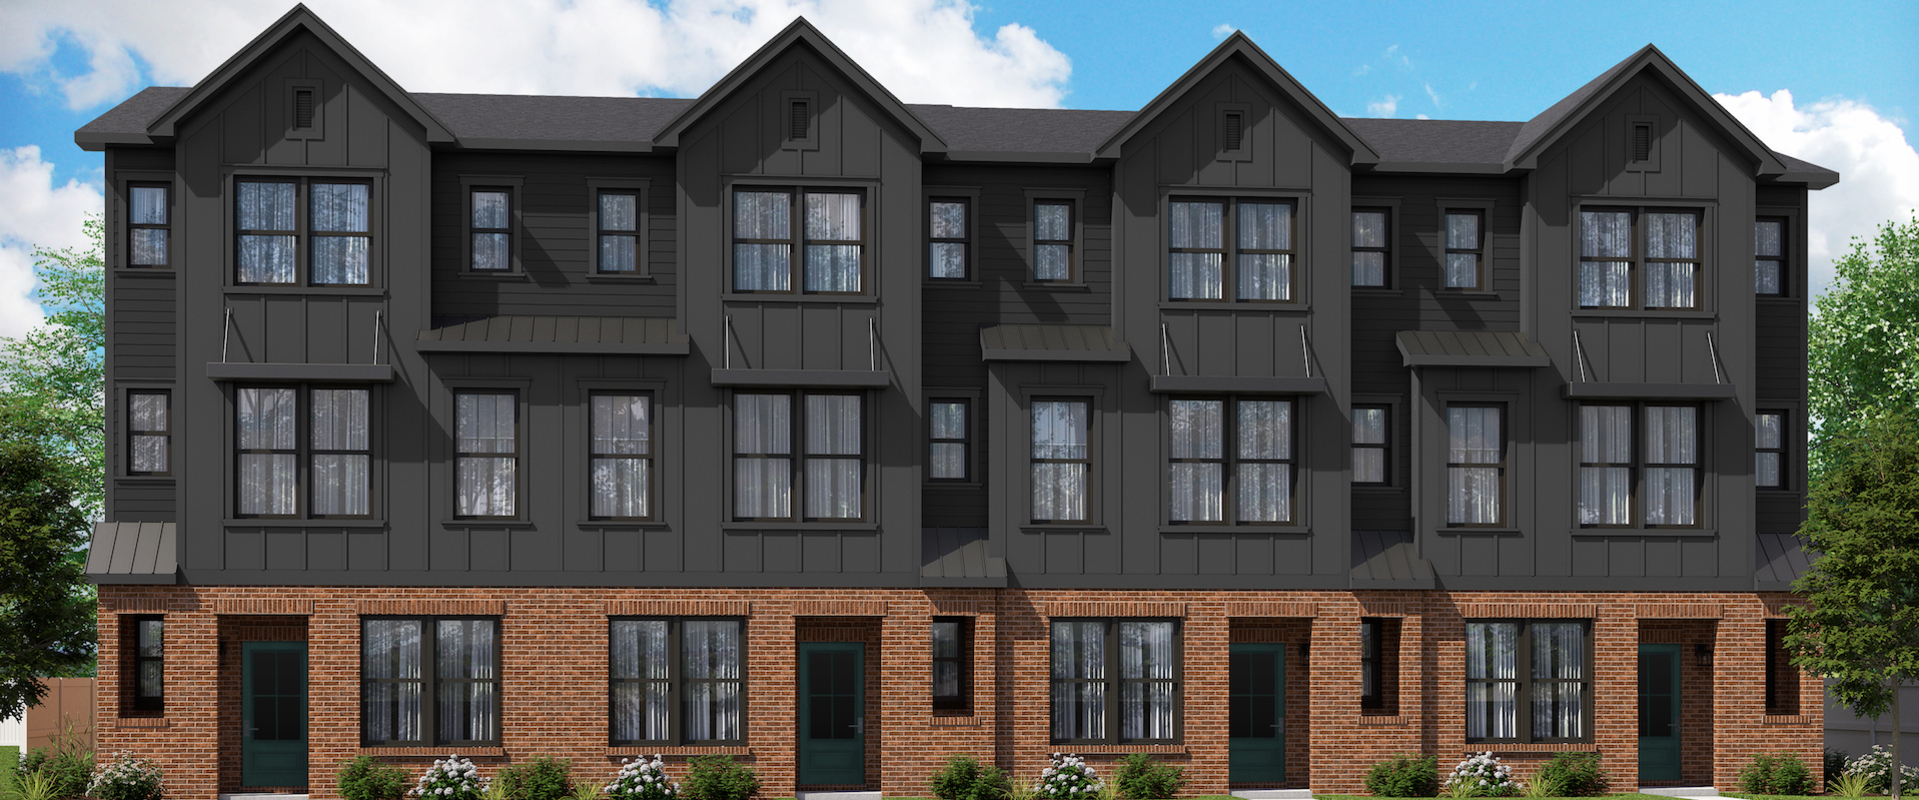 Northside Townhomes